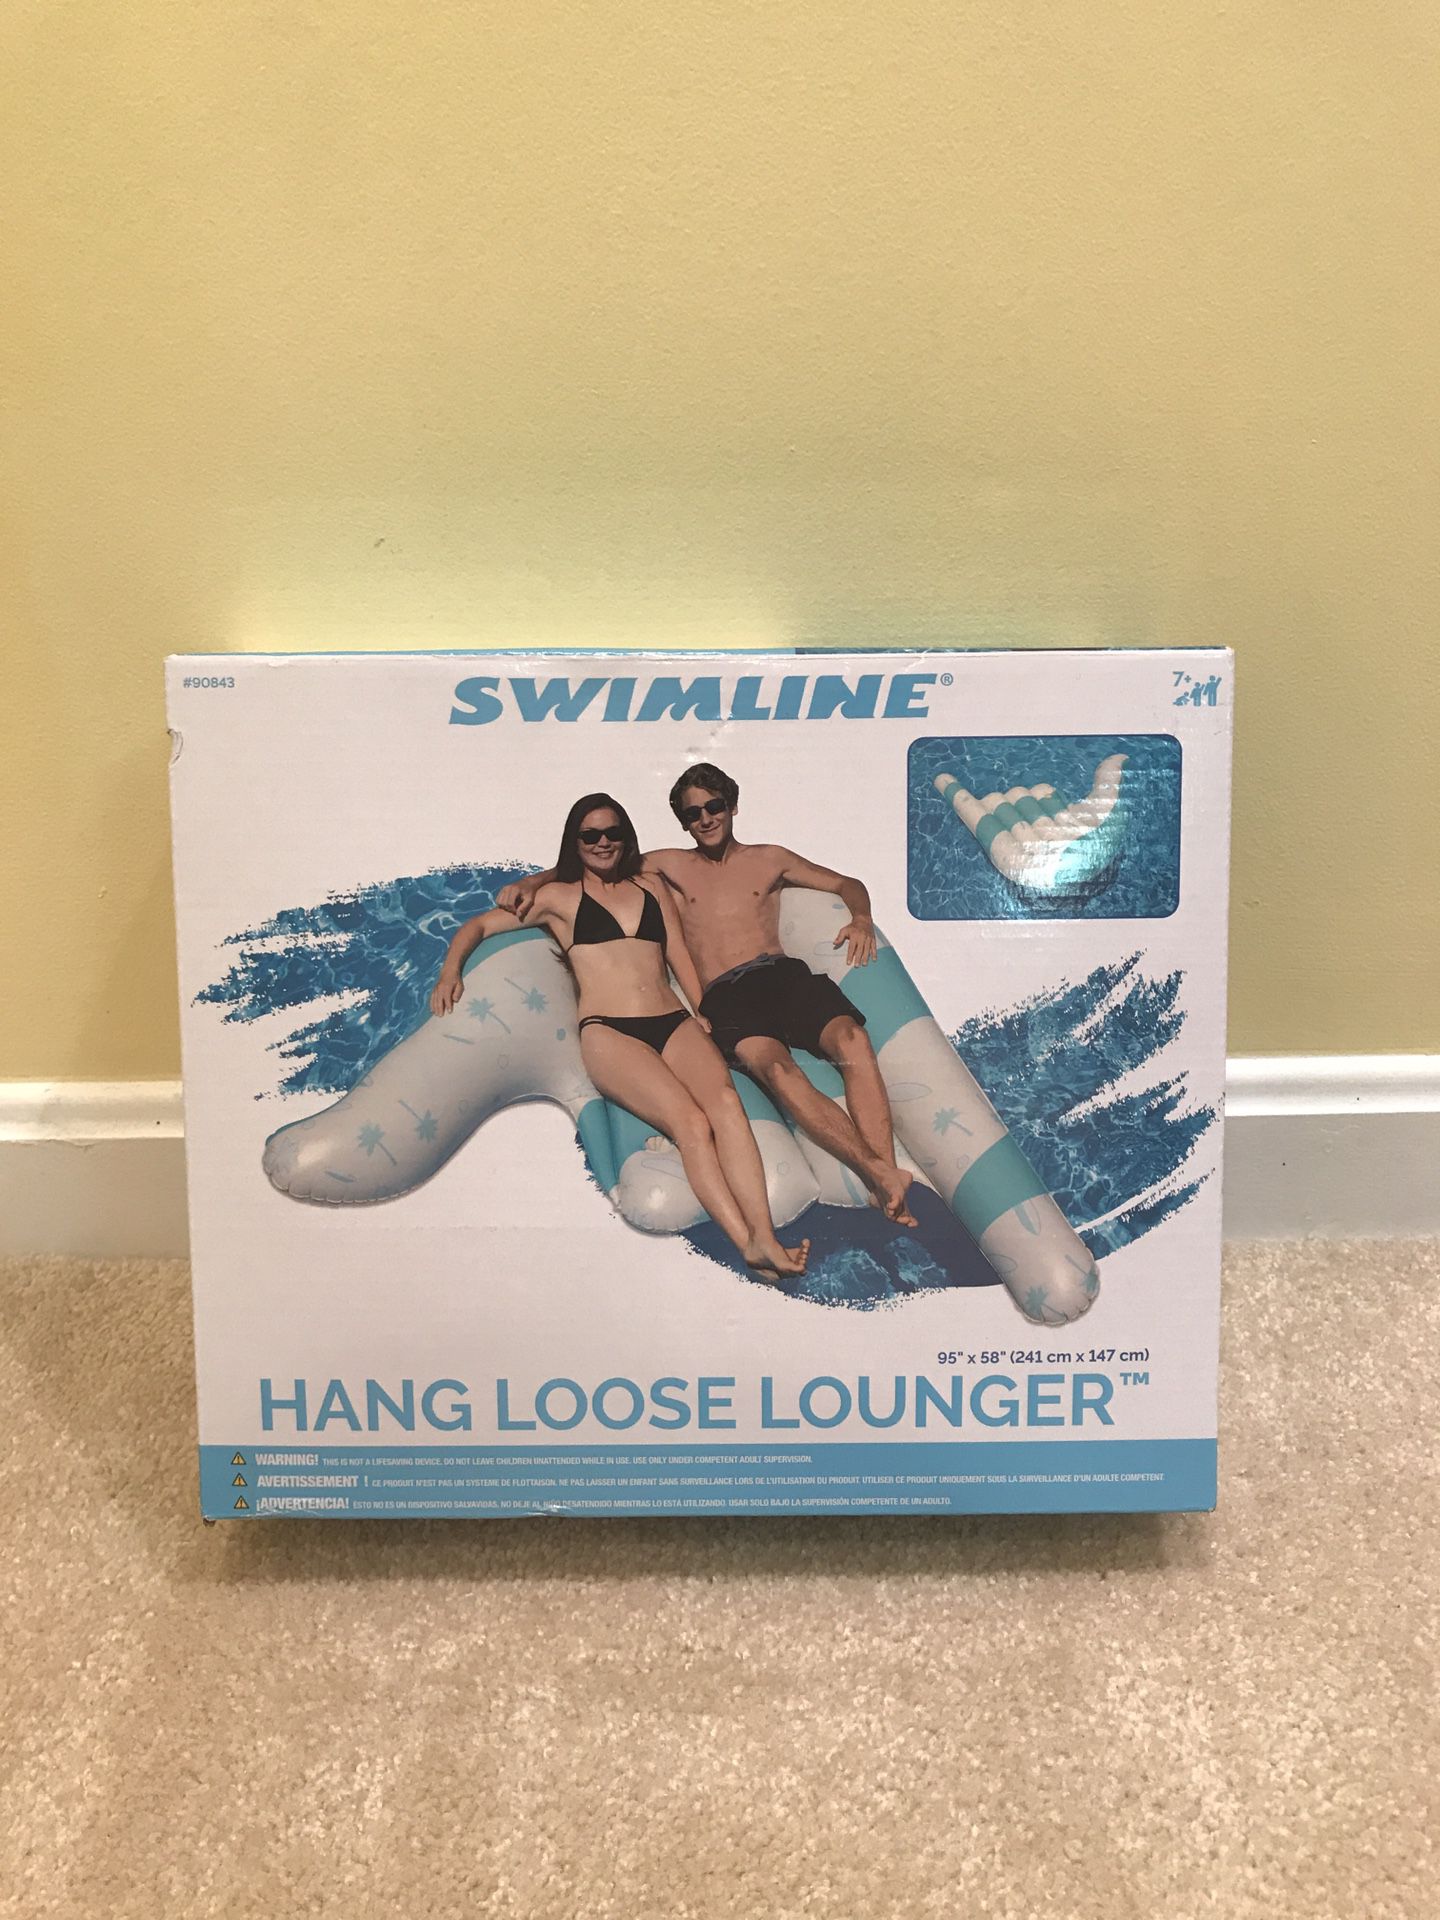 Swimline Inflatable Hang Loose Island Lounger Swimming Pool Float 95 x 58 Inches